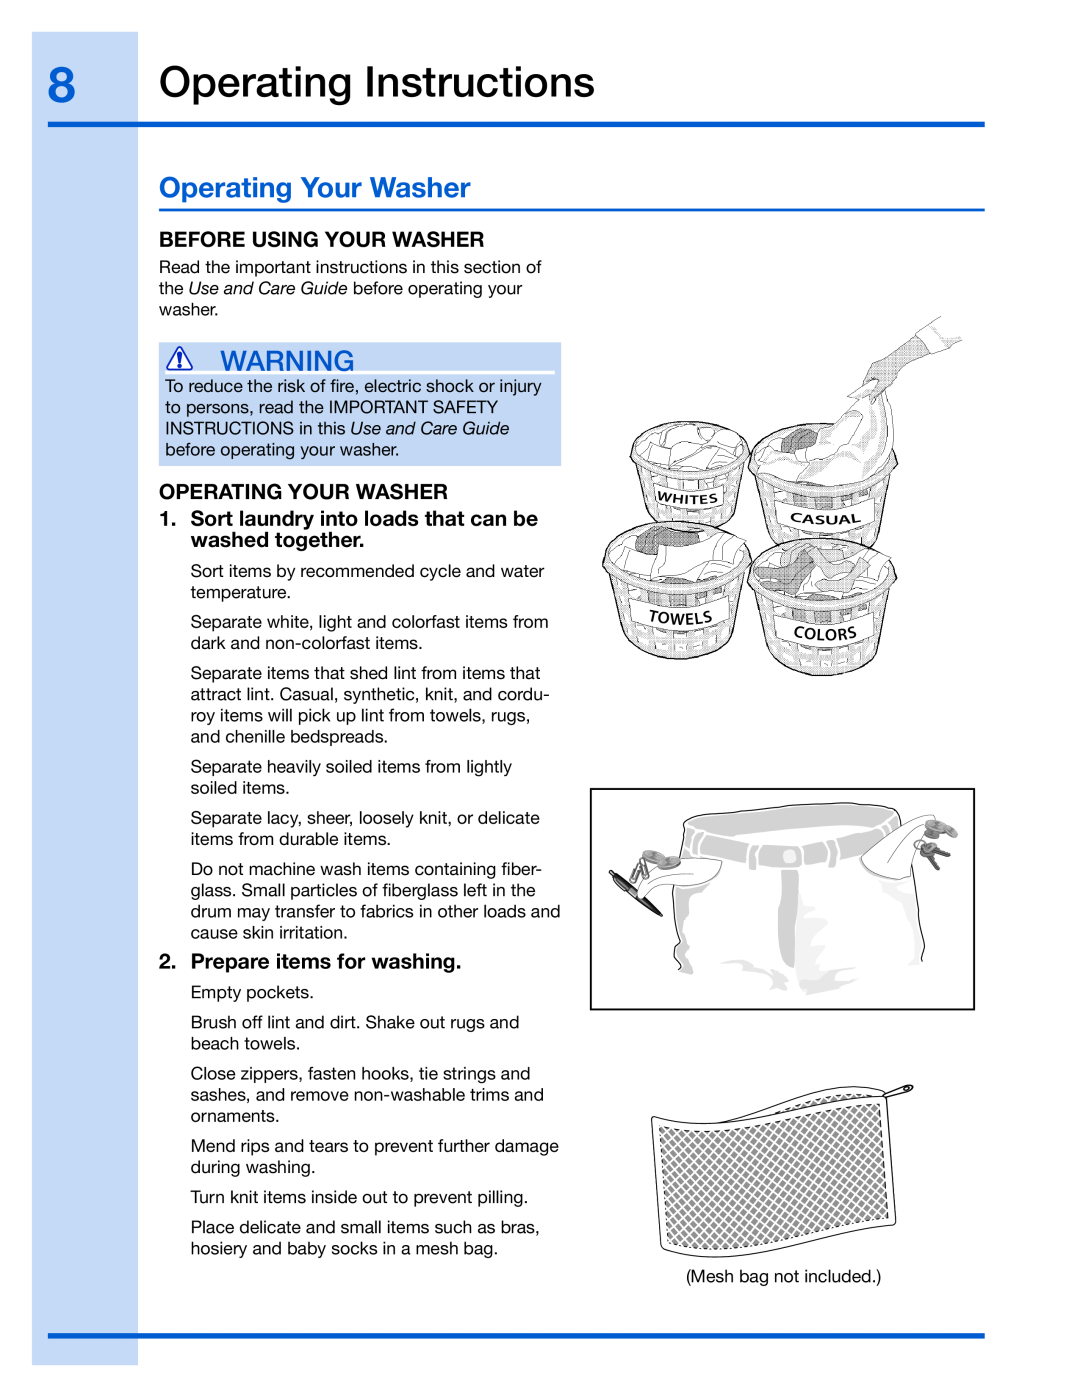 Electrolux 137023200 A Operating Instructions, Operating Your Washer, Before Using Your Washer, Prepare items for washing 